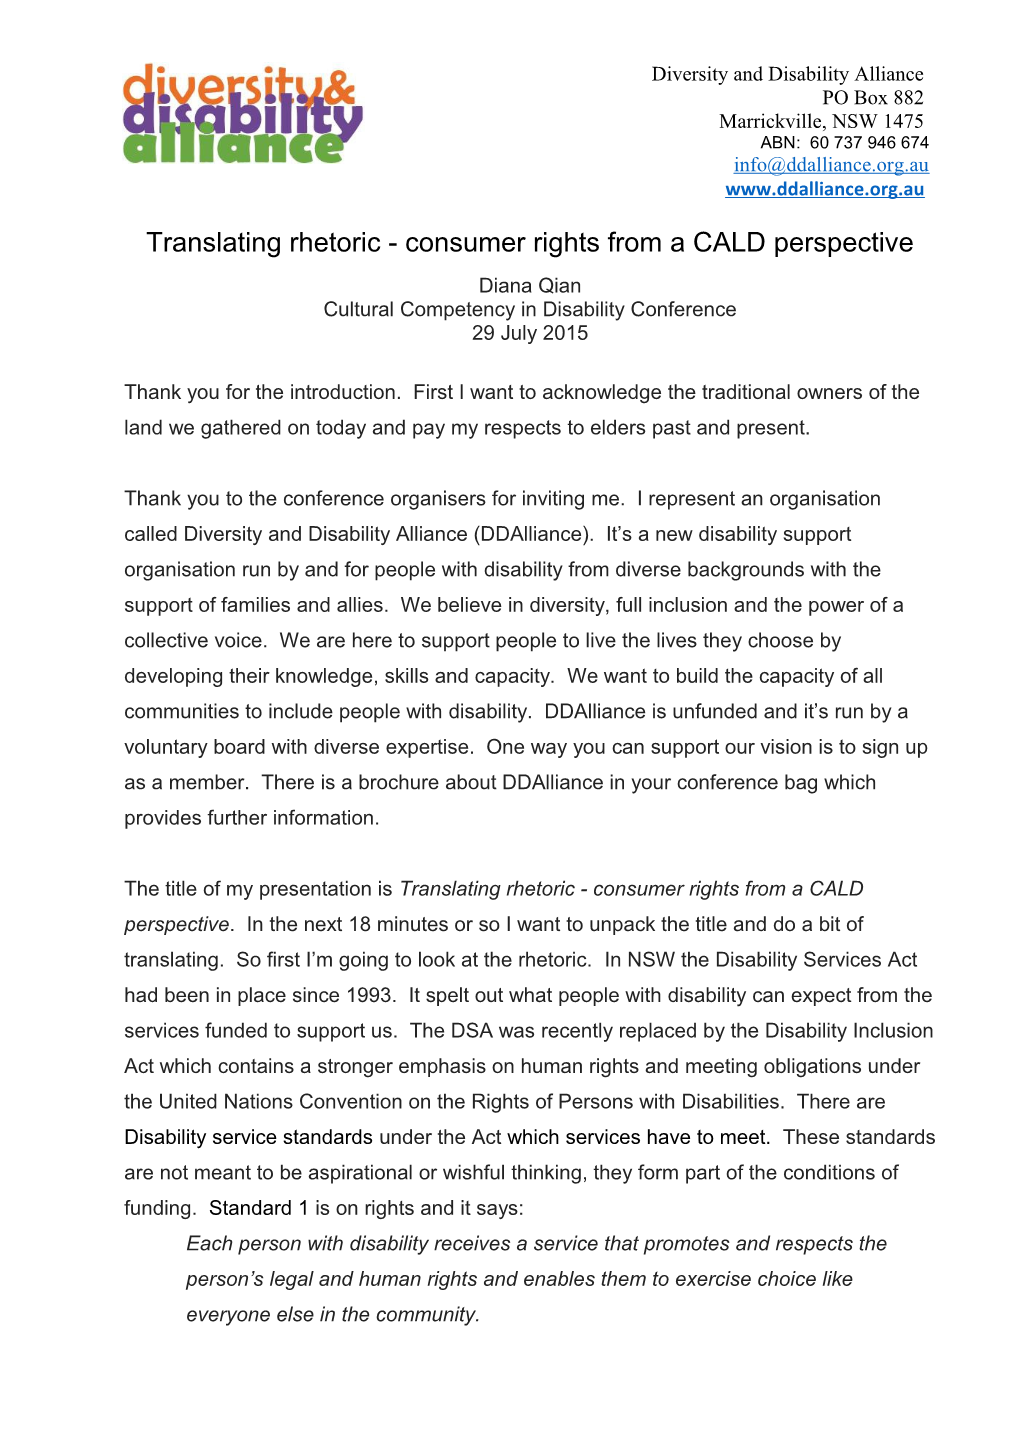 Translating Rhetoric - Consumer Rights from a CALD Perspective